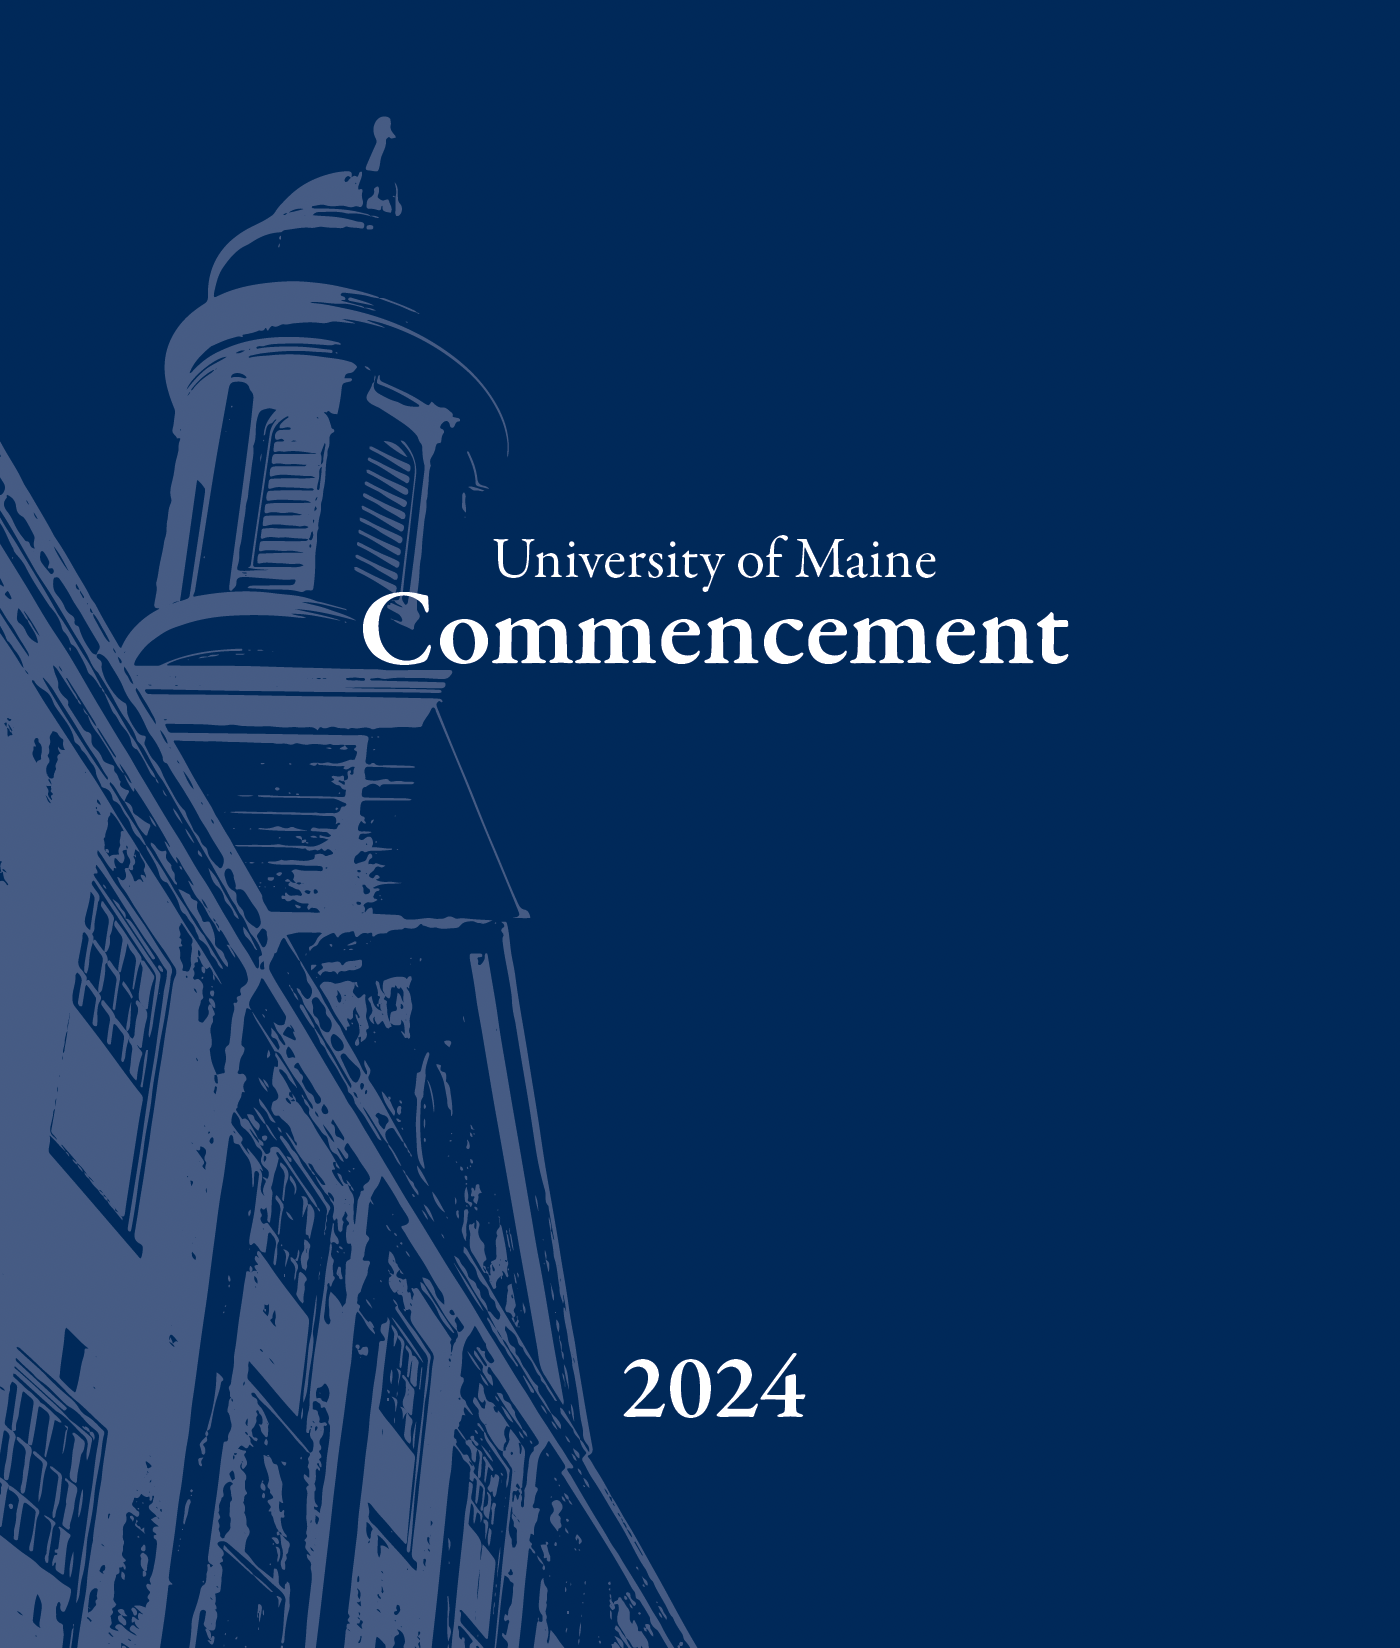 The cover of the 2024 commencement program that reads "University of Maine Commencement 2024"